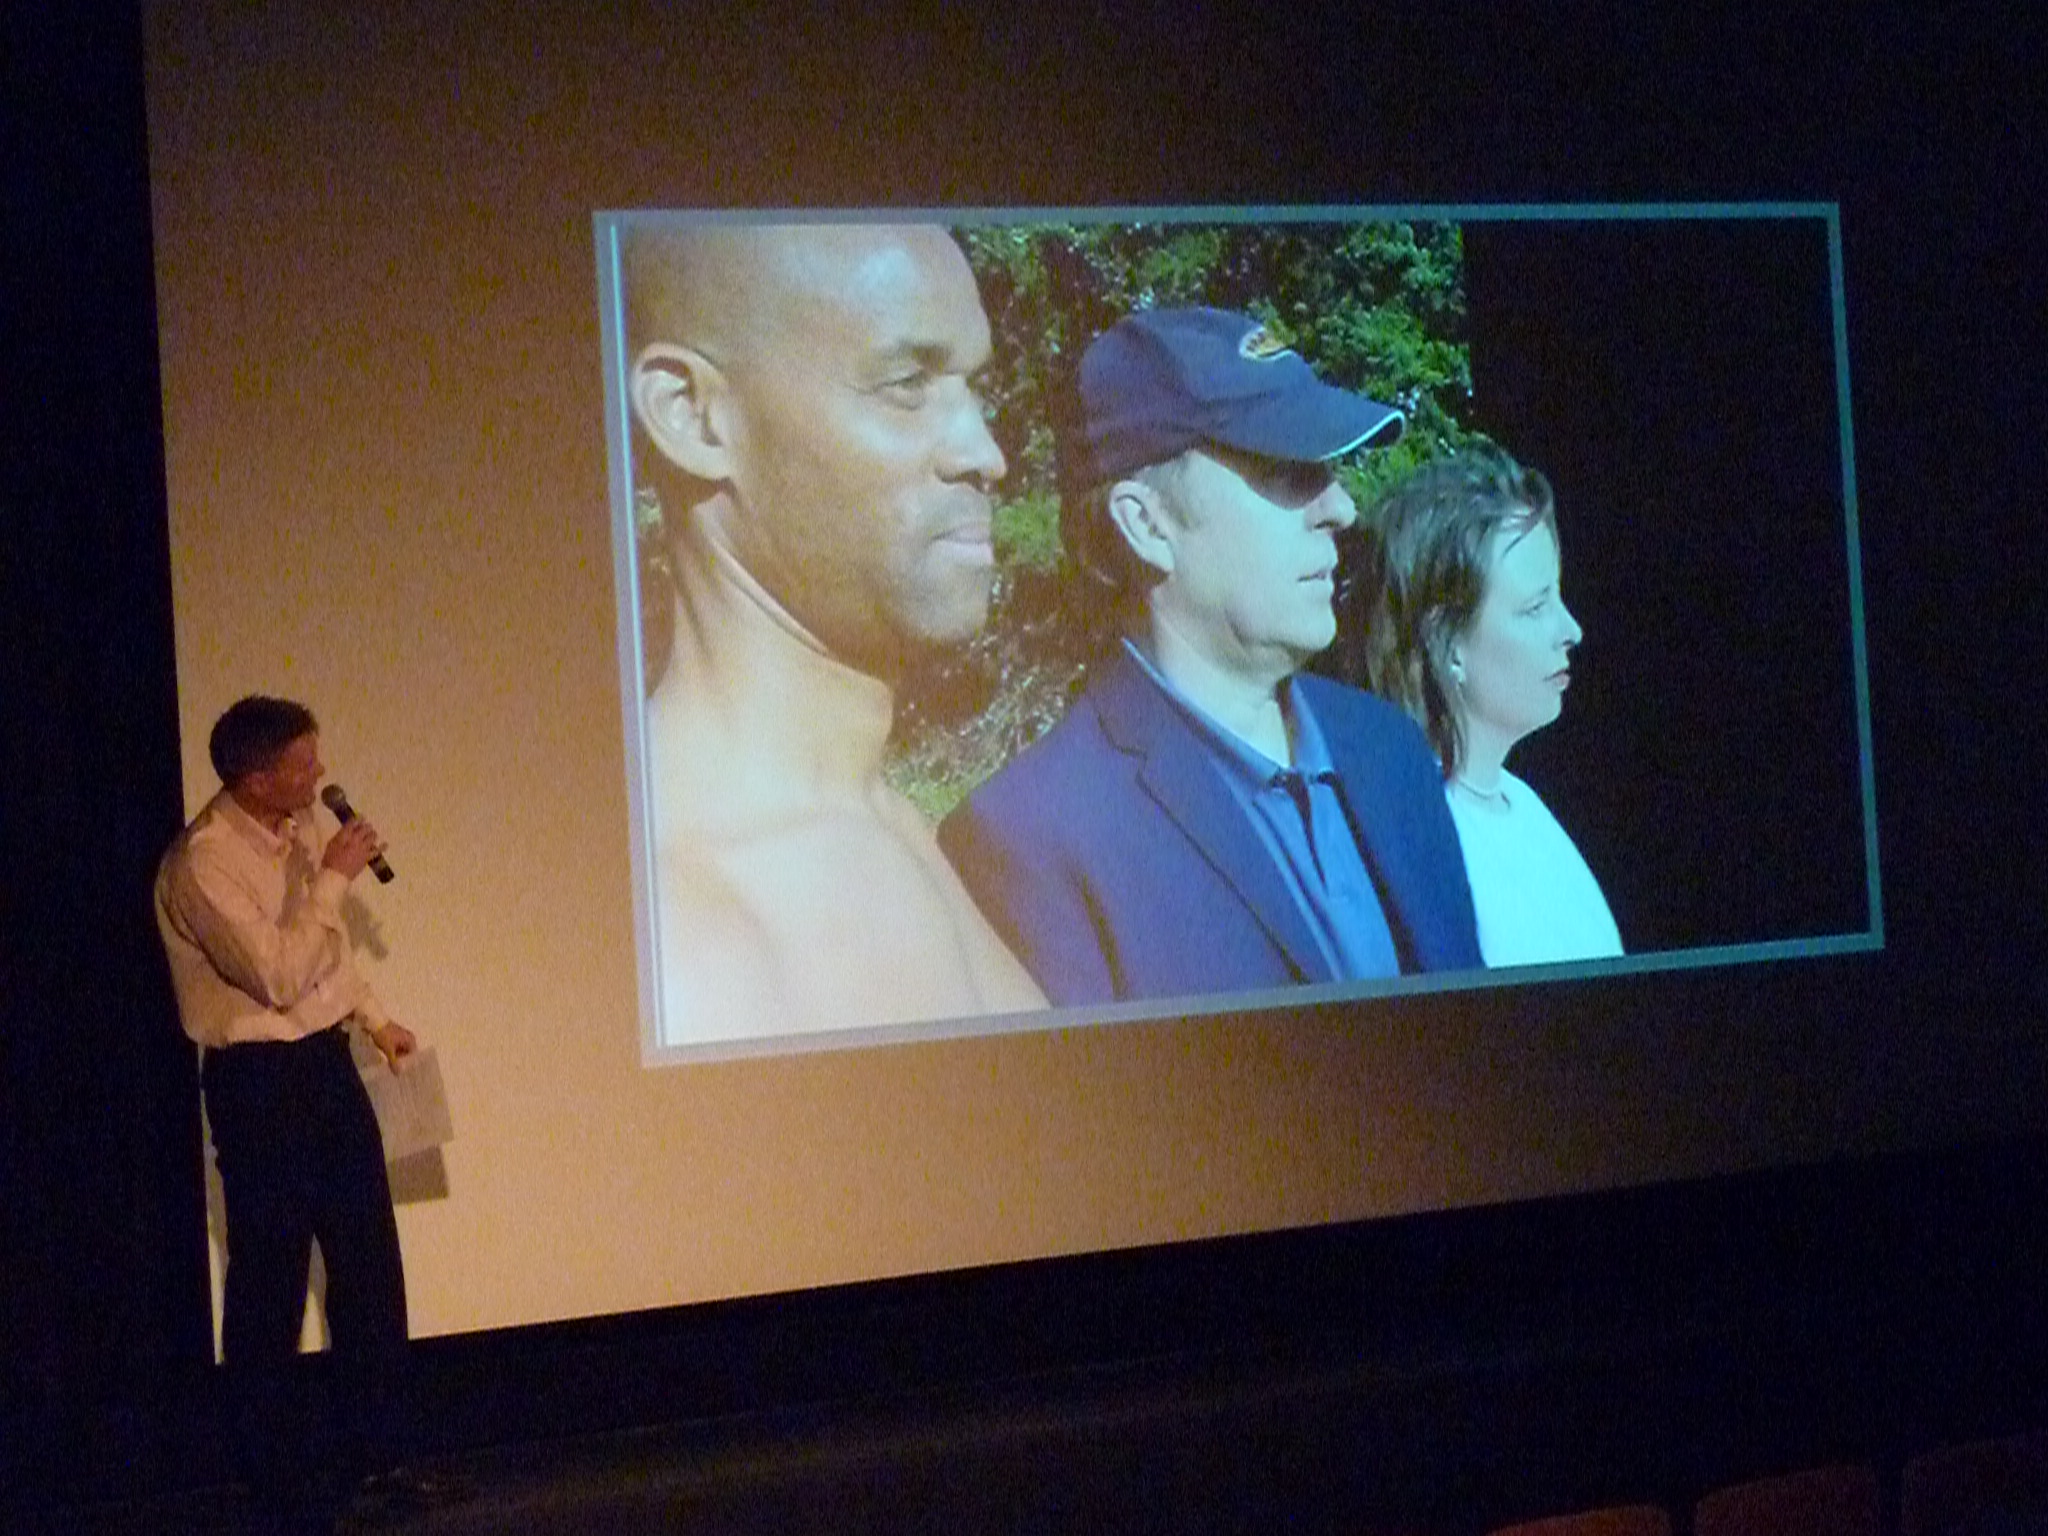 Eric Oberli (Editor) talks about his work of visual special effects at the European Film Premiere in Switzerland